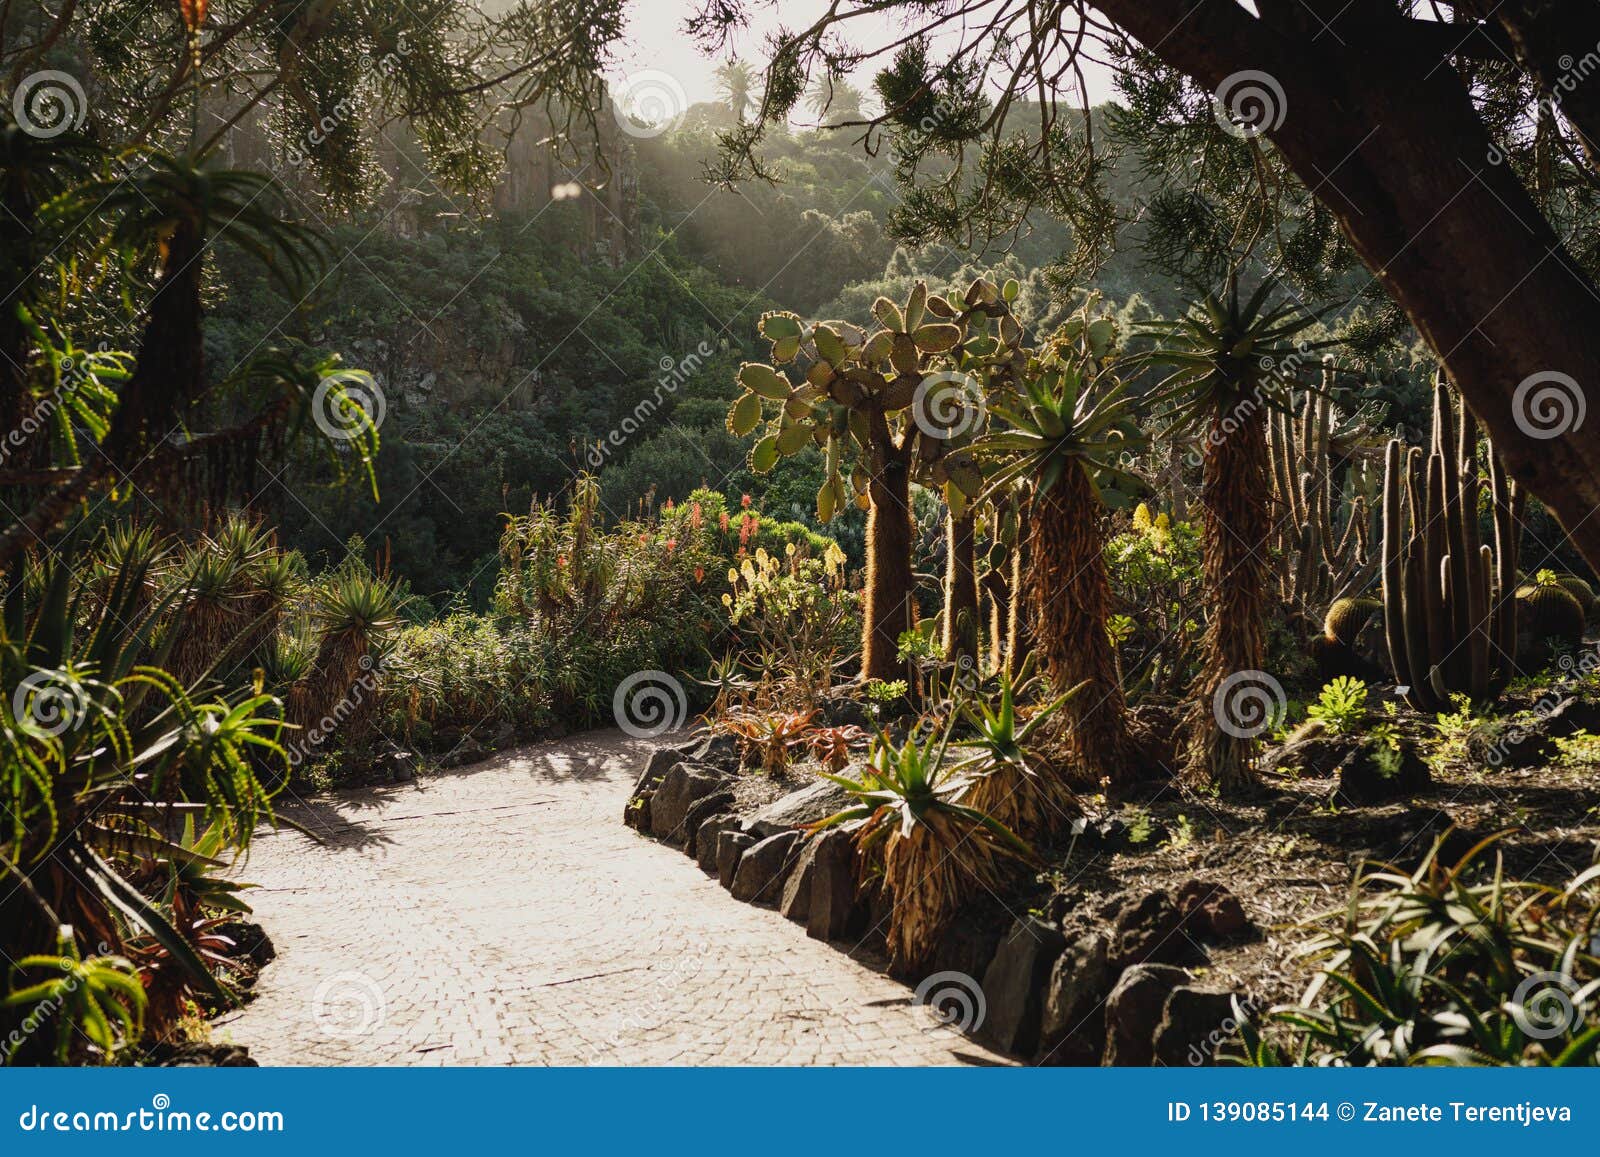 a path in botanical garden in gran canaria with various trees, cactus, bright flowers